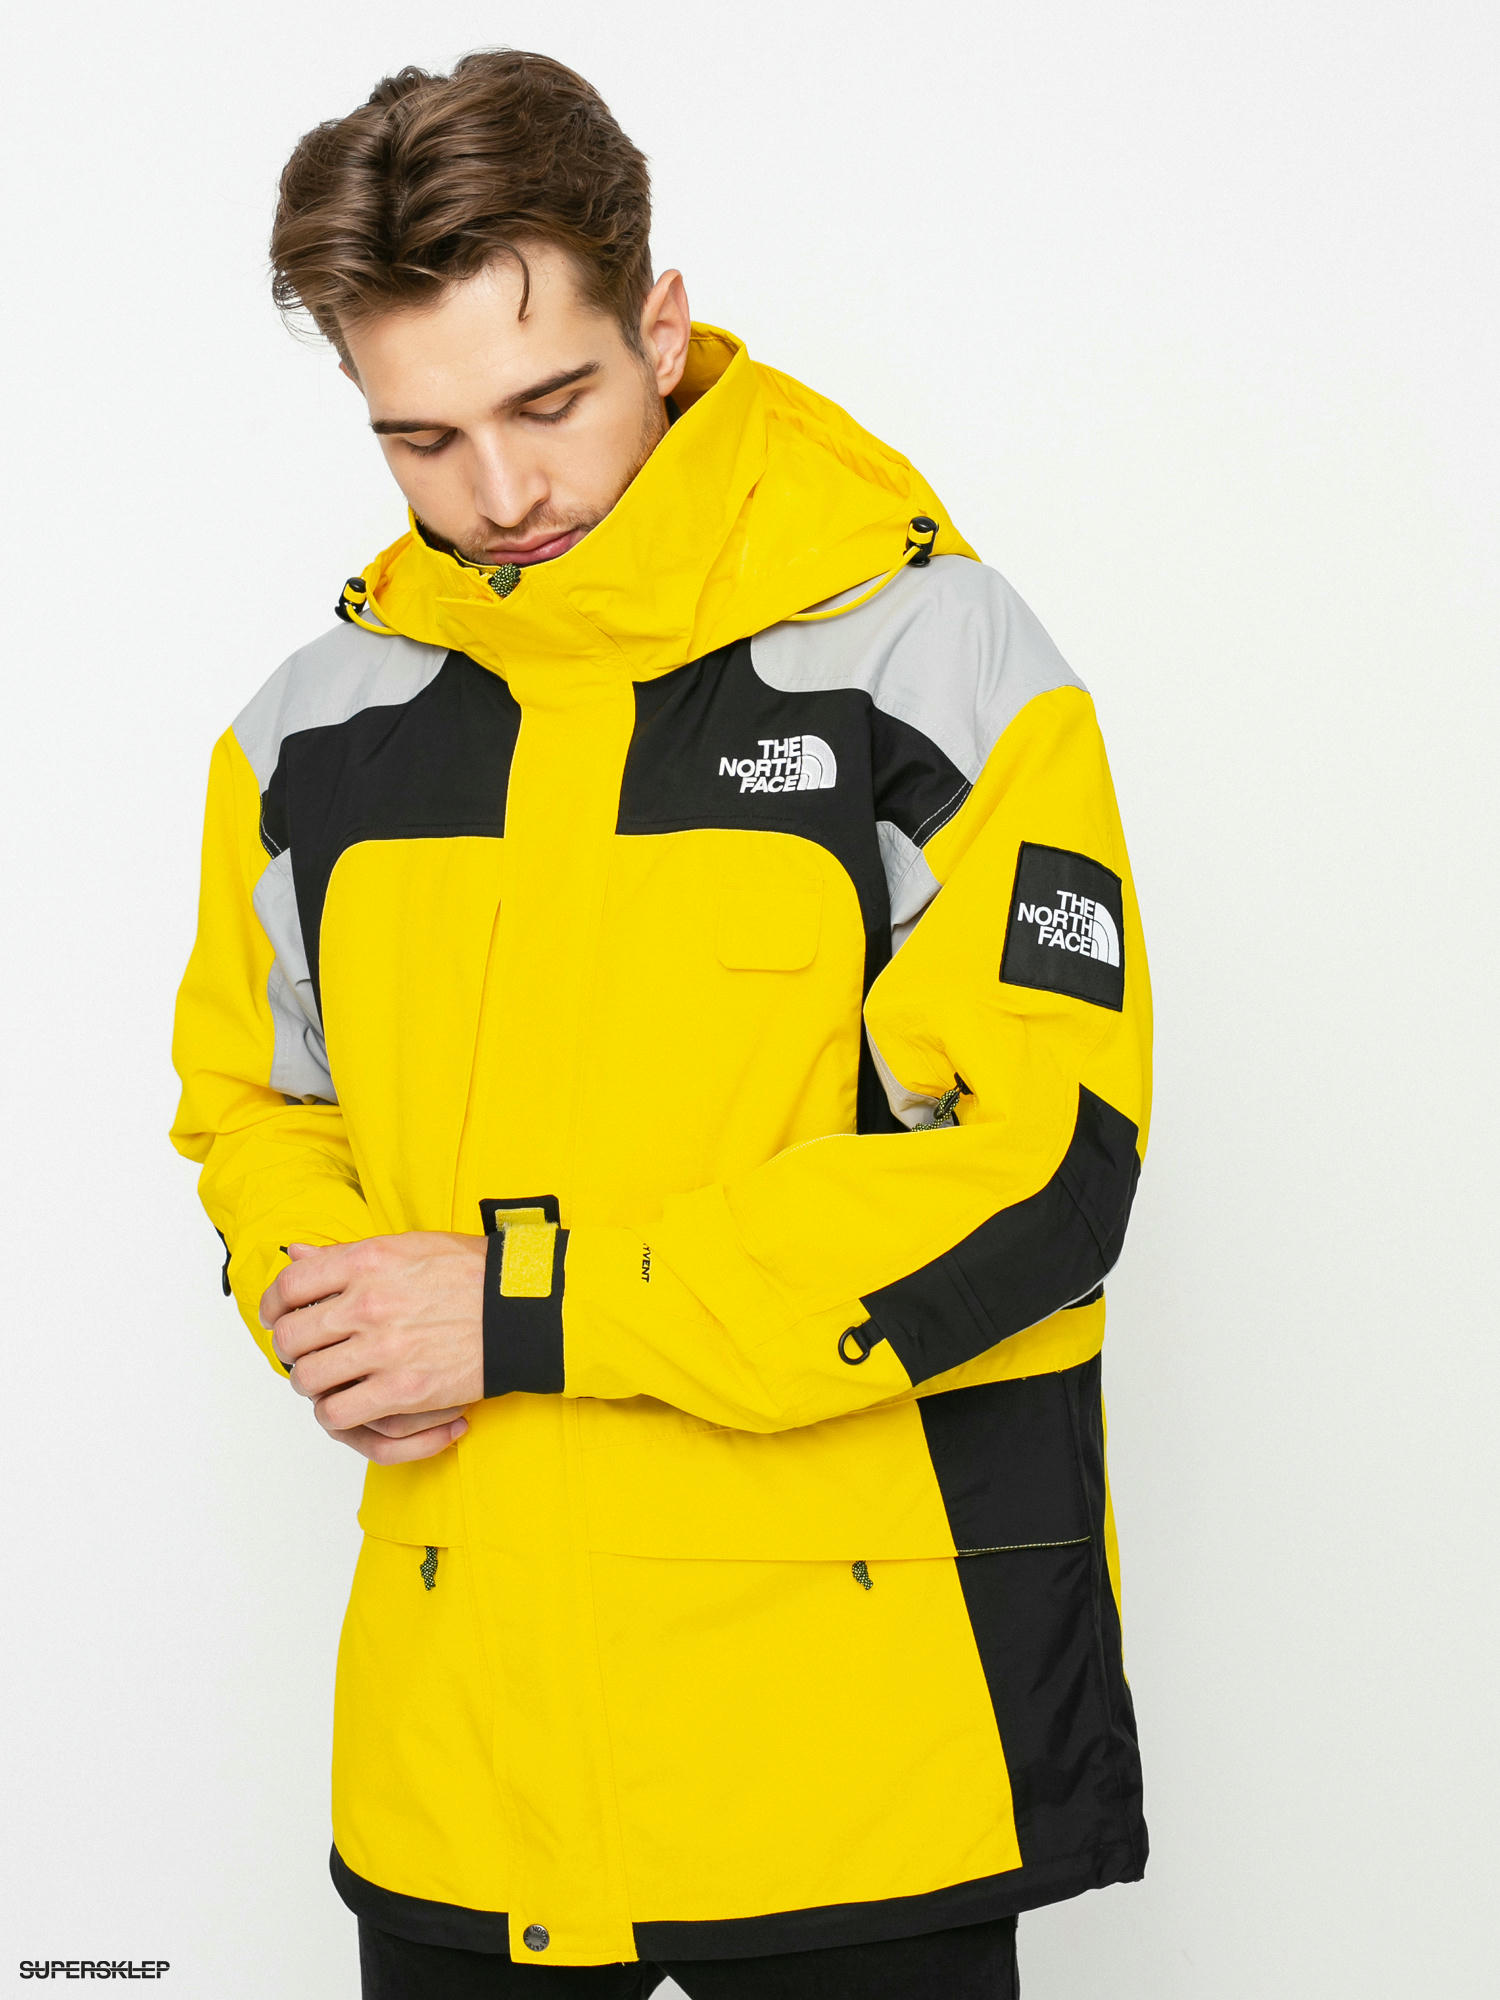 THE NORTH FACE search & rescue ジャケット